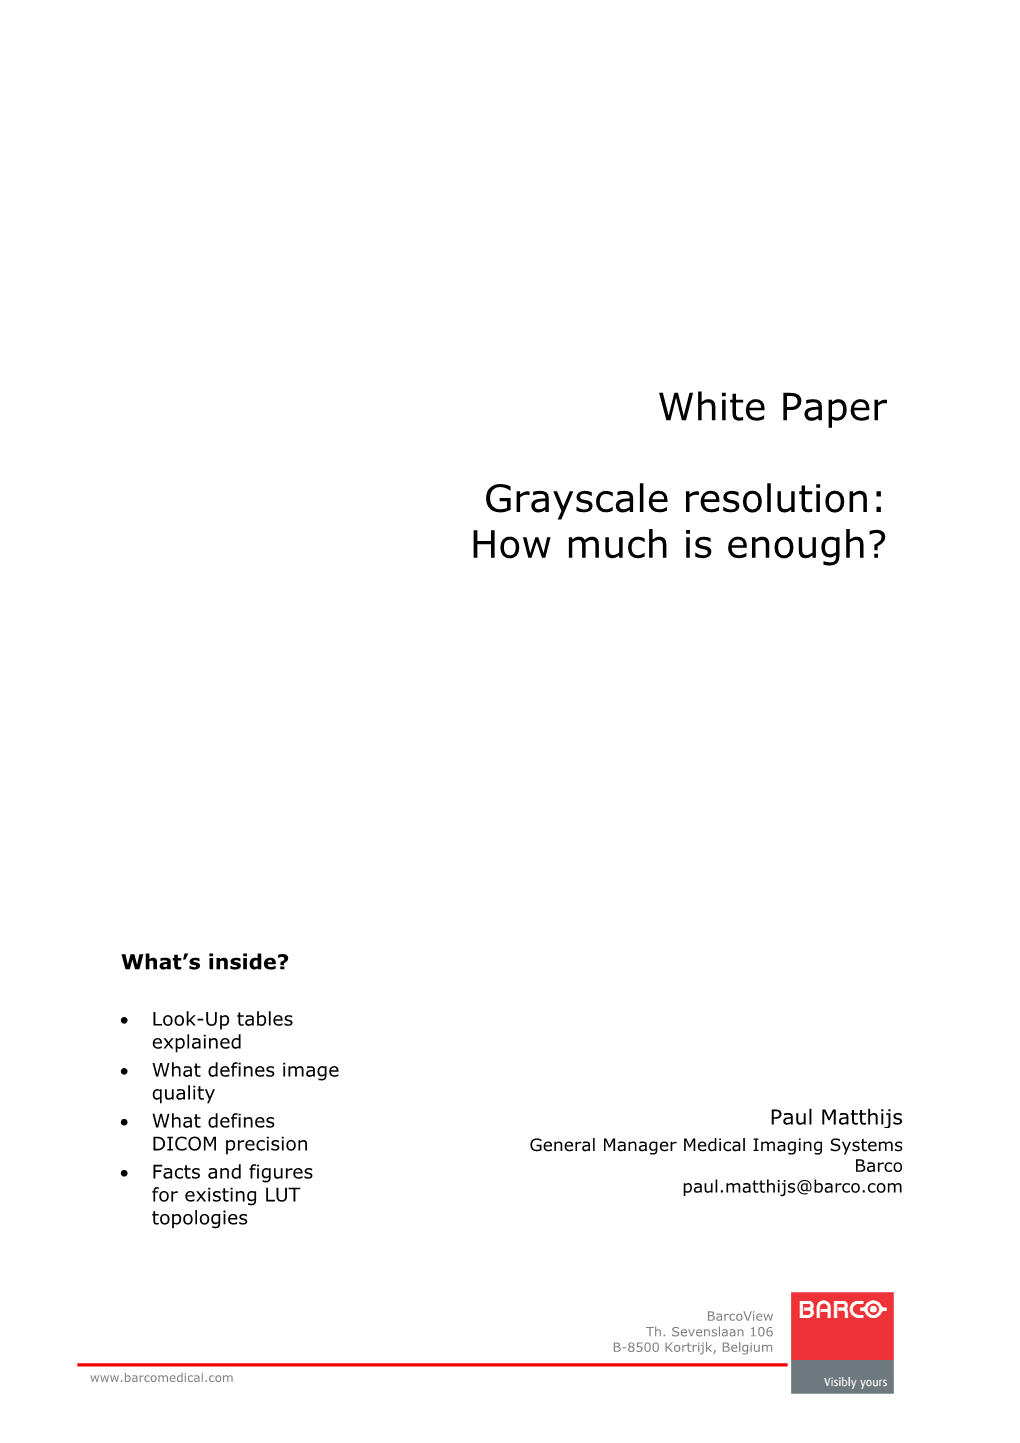 White Paper Grayscale Resolution: How Much Is Enough?